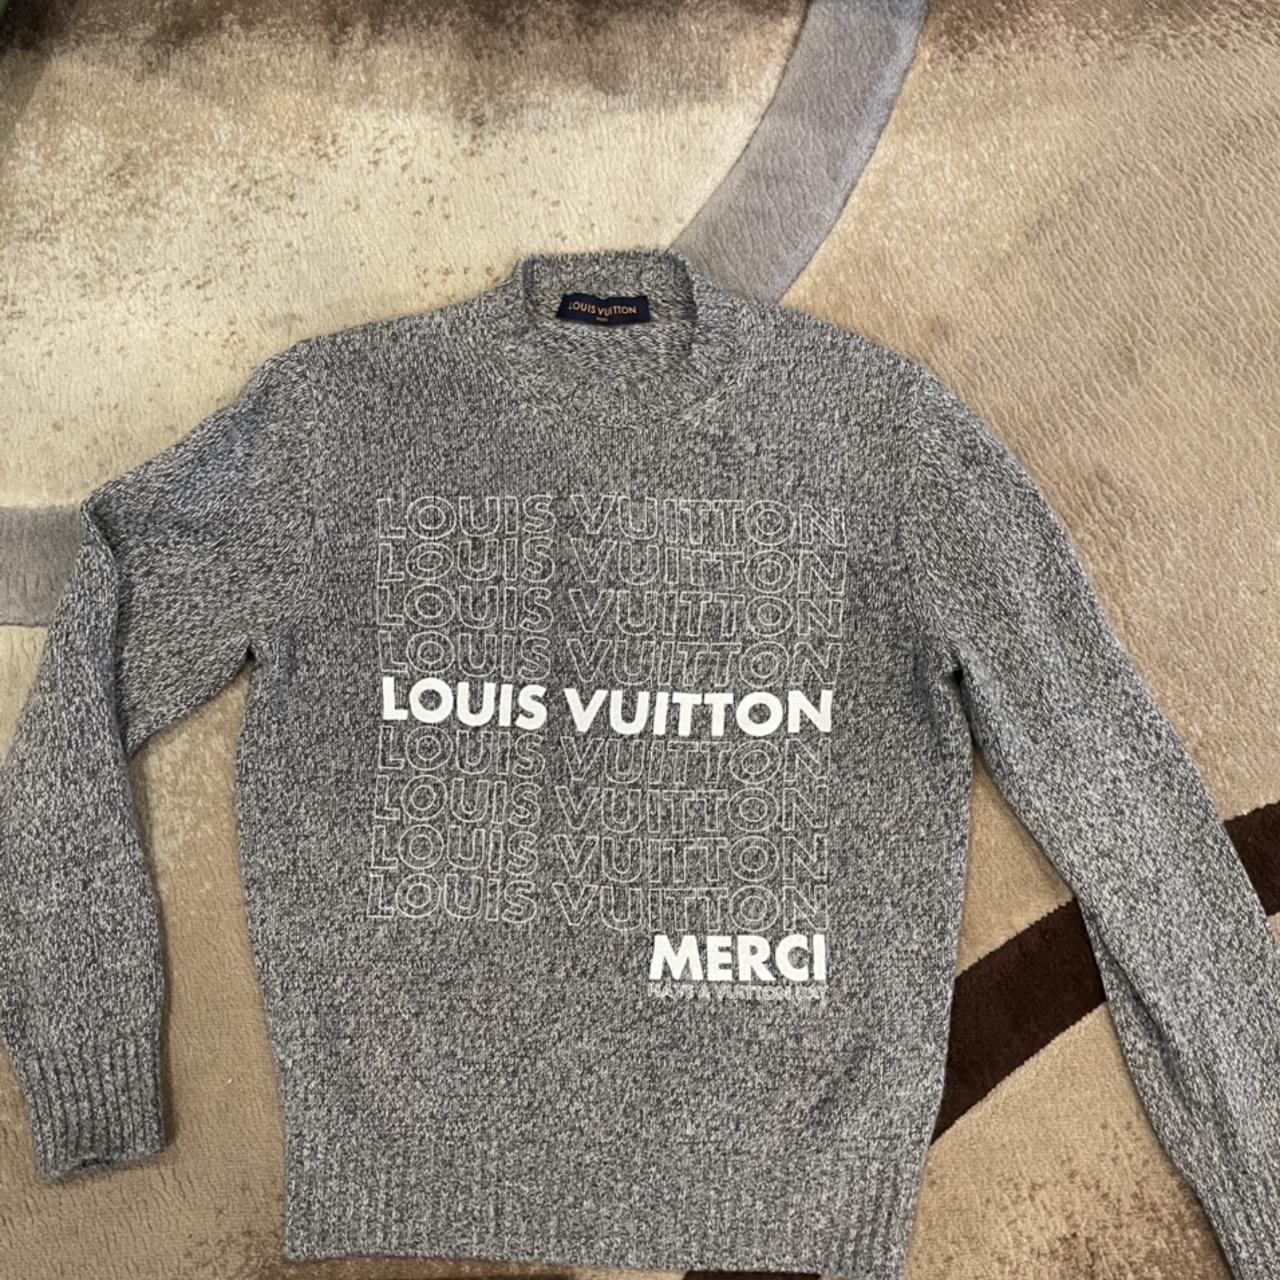 Louis vuitton merci knit sweater sz M, Worn once for...